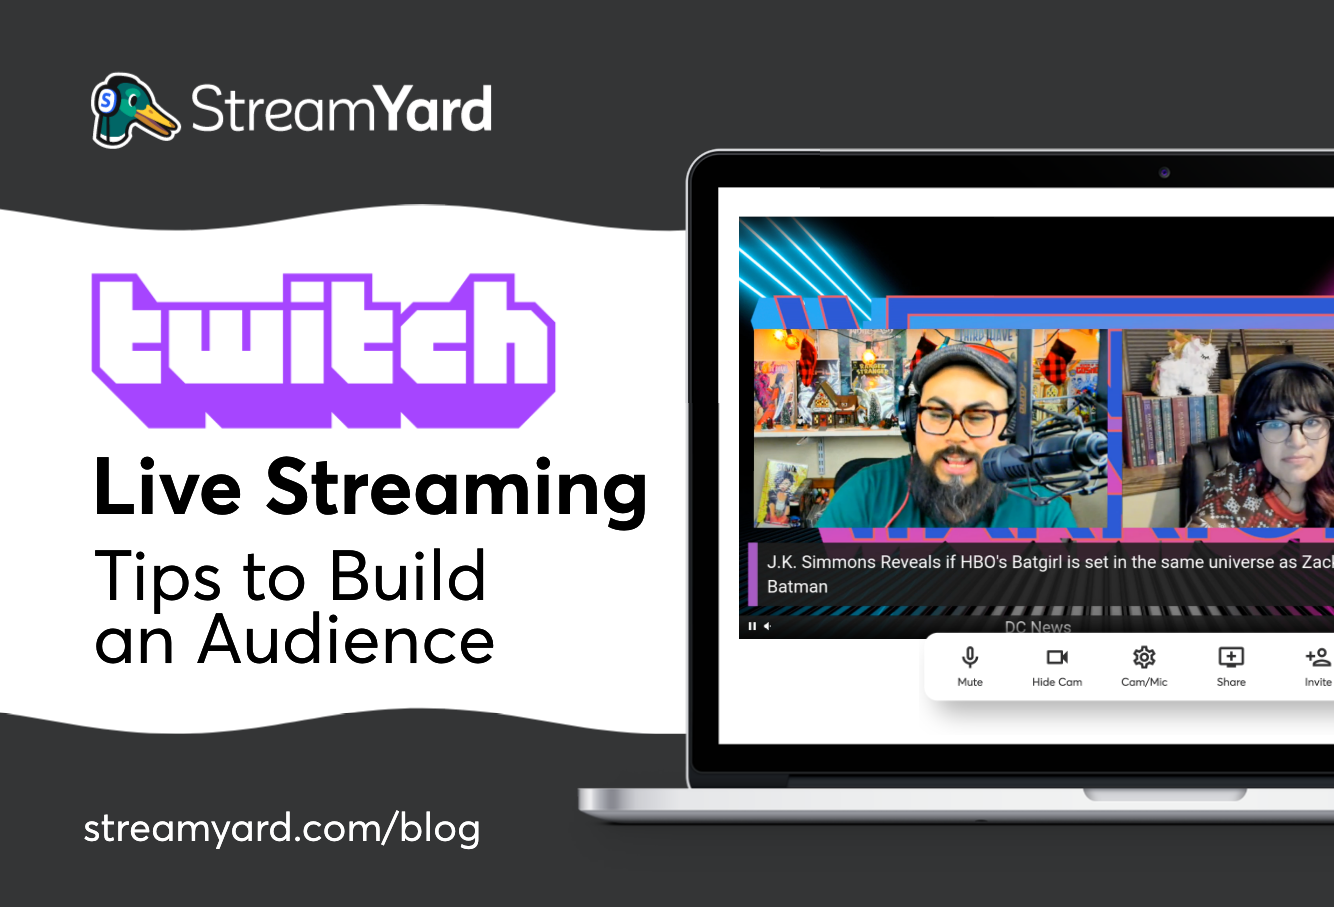 How to build a successful streaming community on Twitch - ITP Live